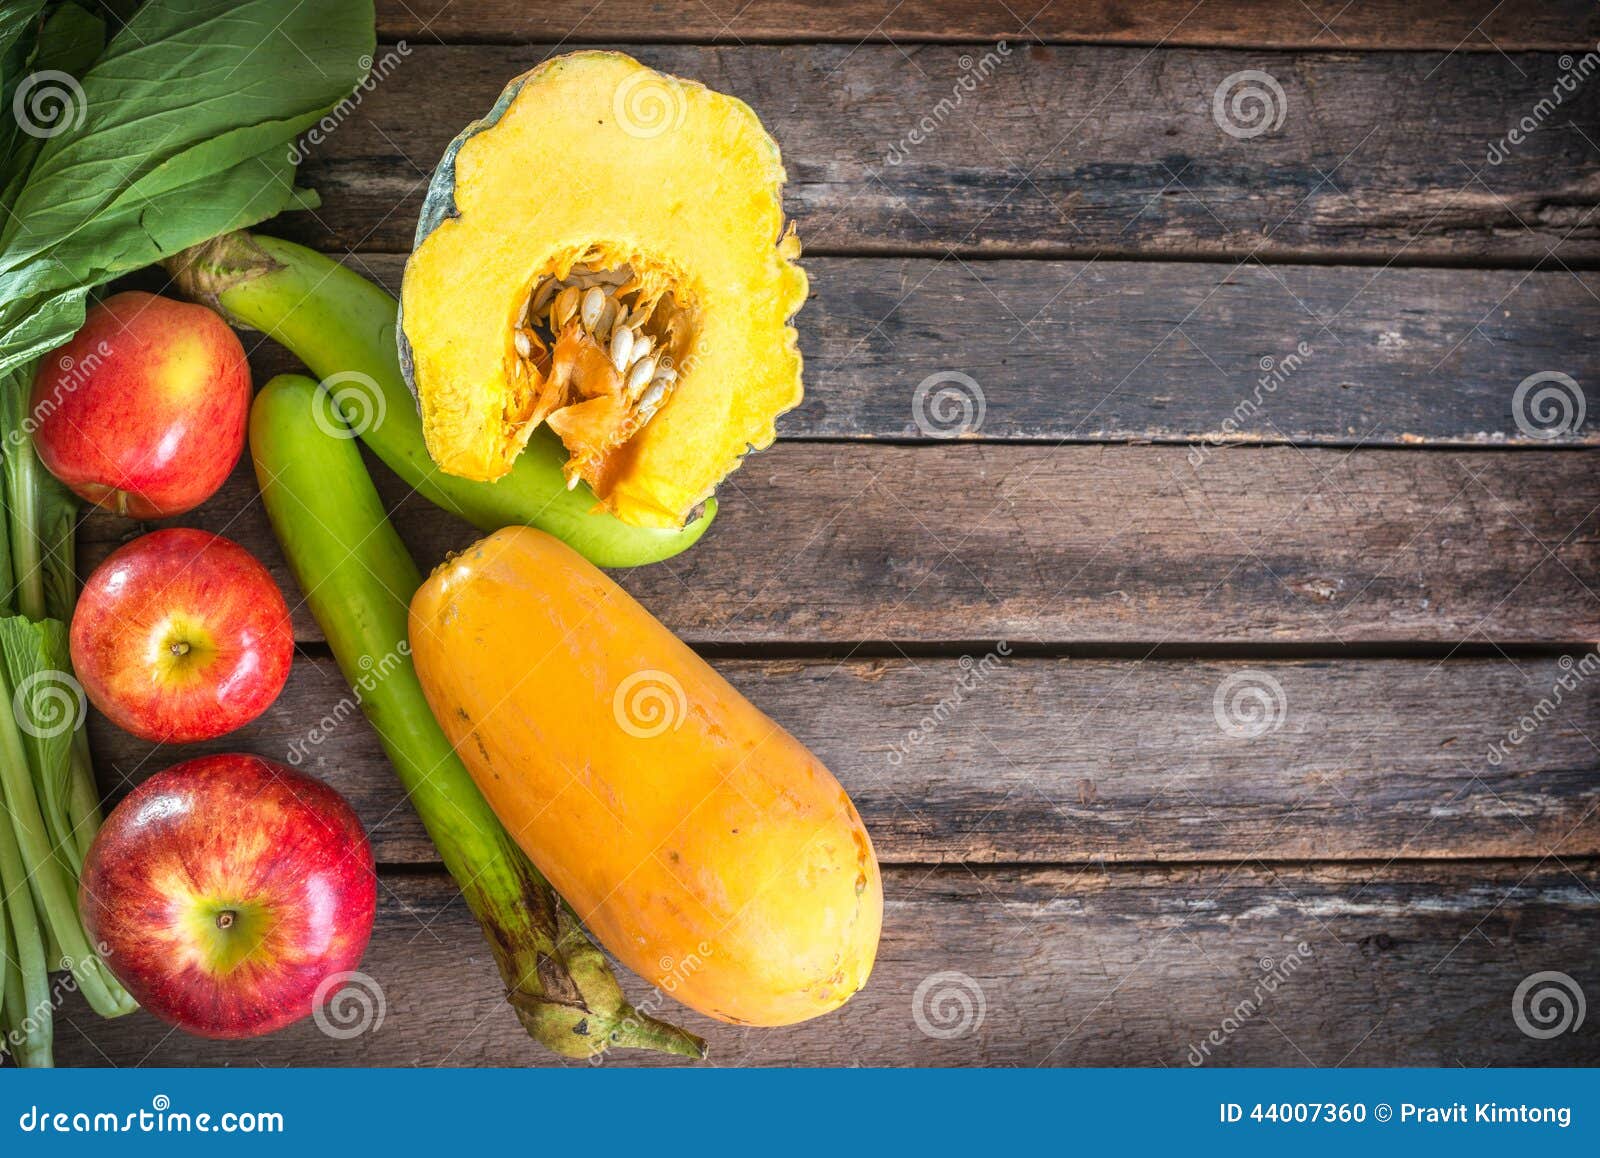 vegetables and fruits on wooden table